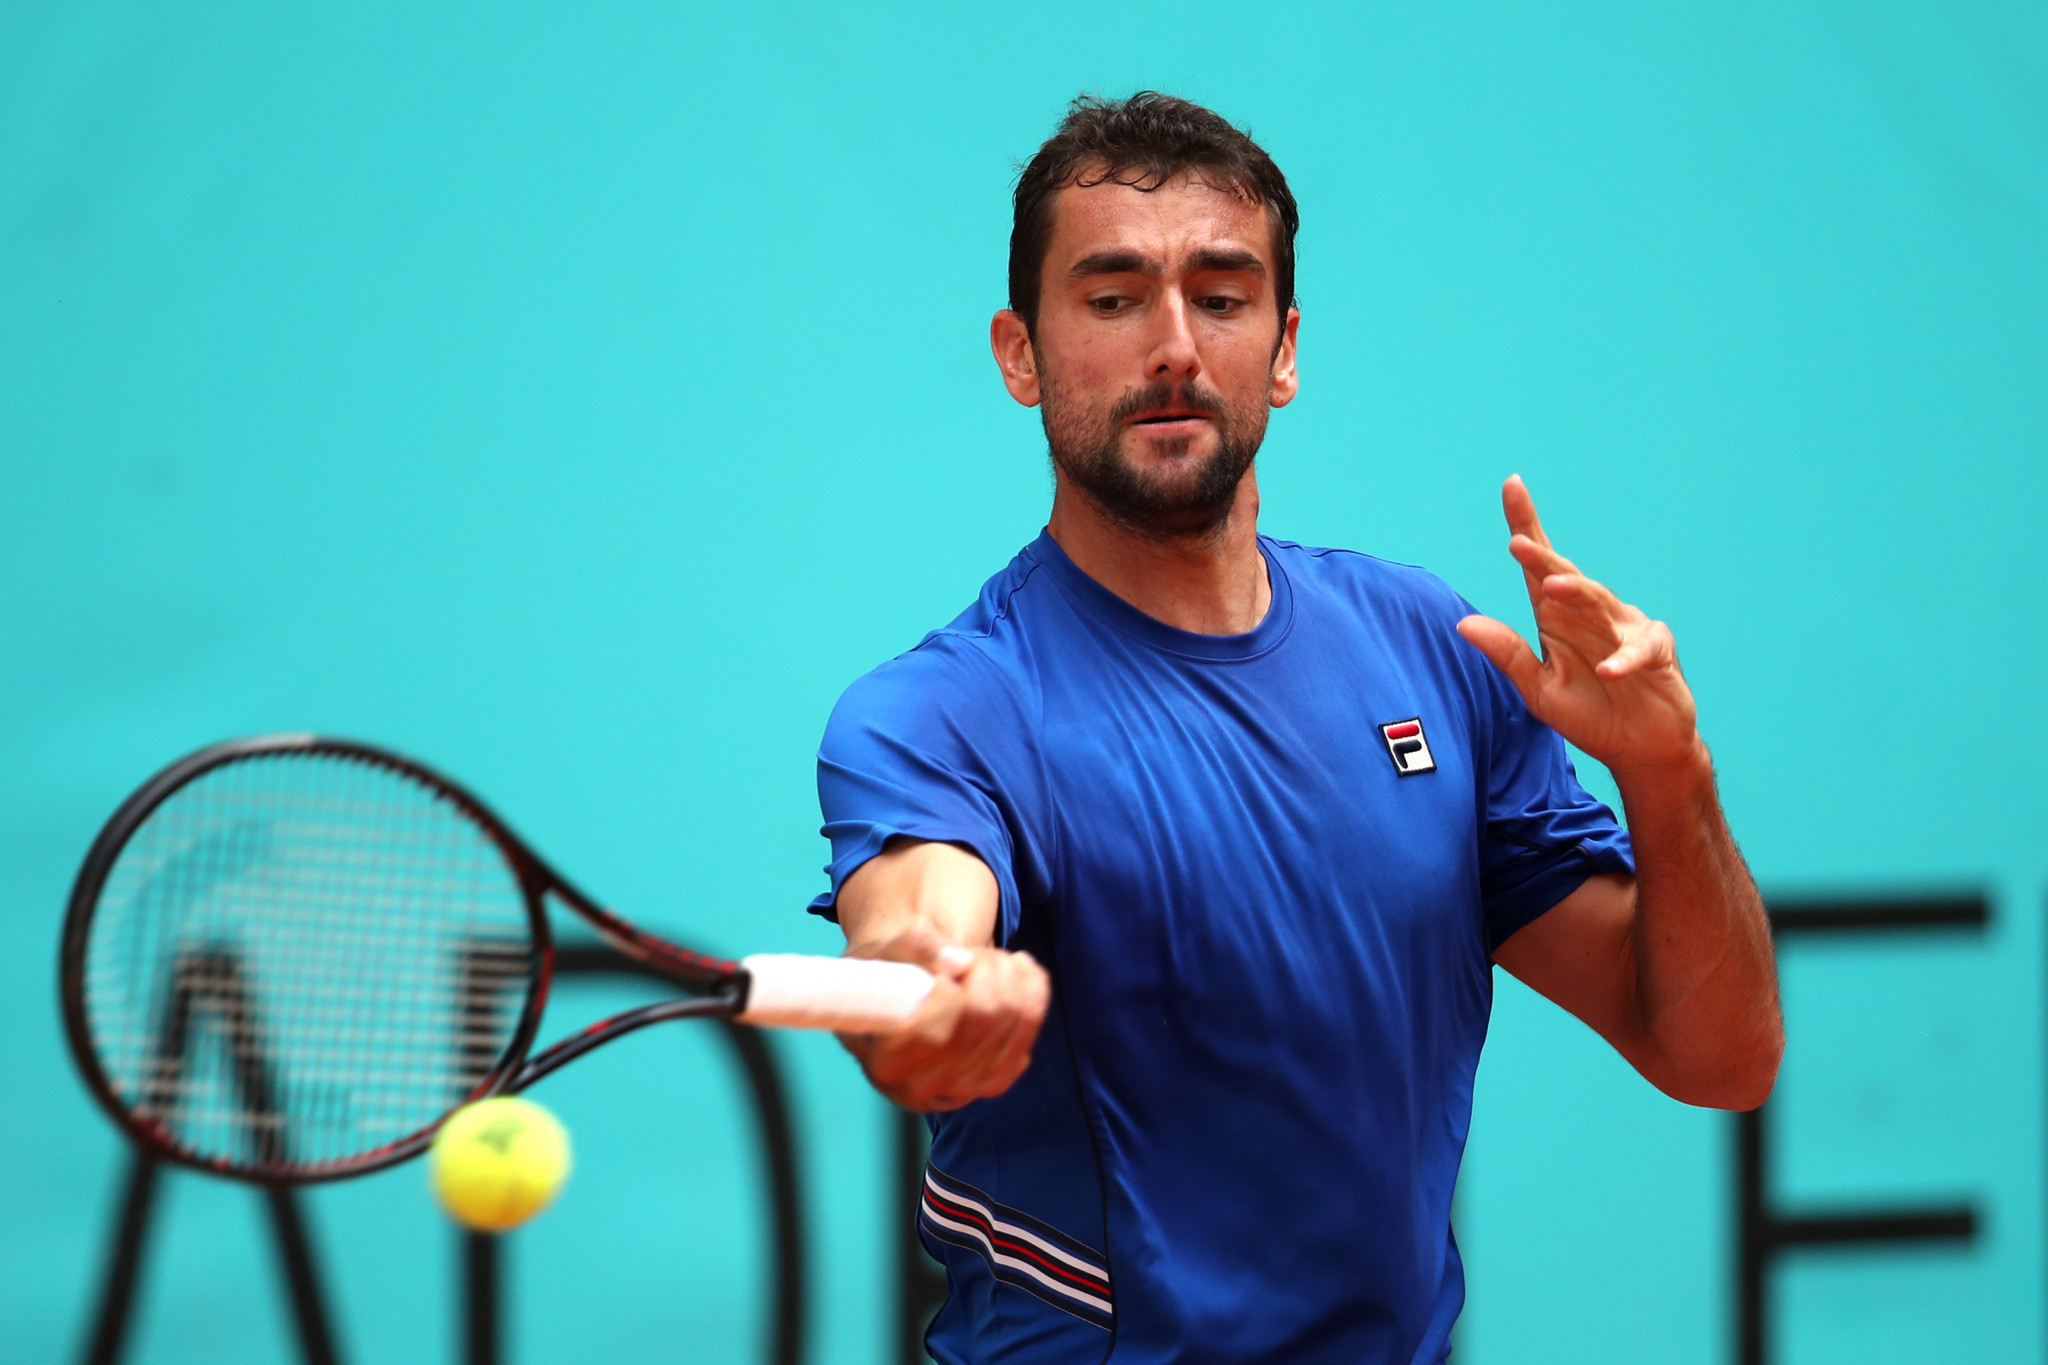 Croatia's Marin Čilić edged into the second round of the men's event ©Getty Images